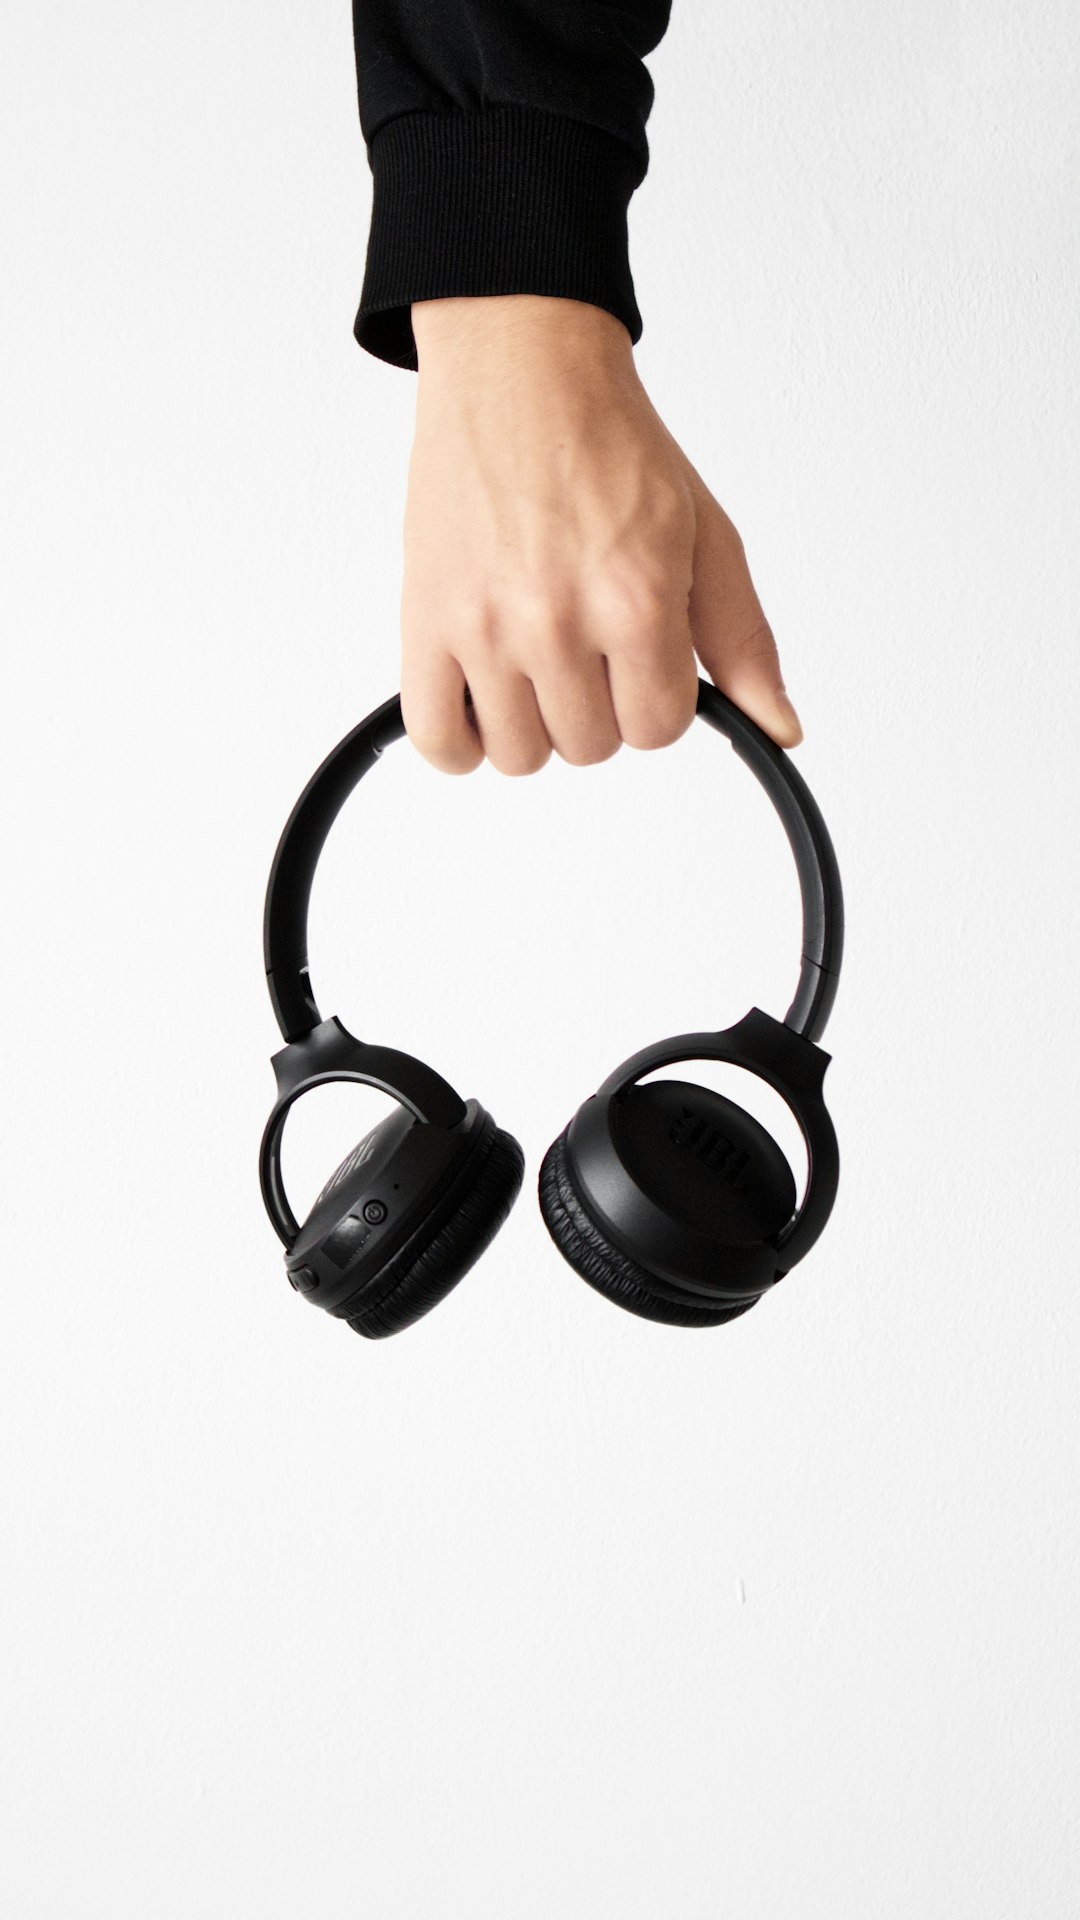 person holding black and gray wireless headphones